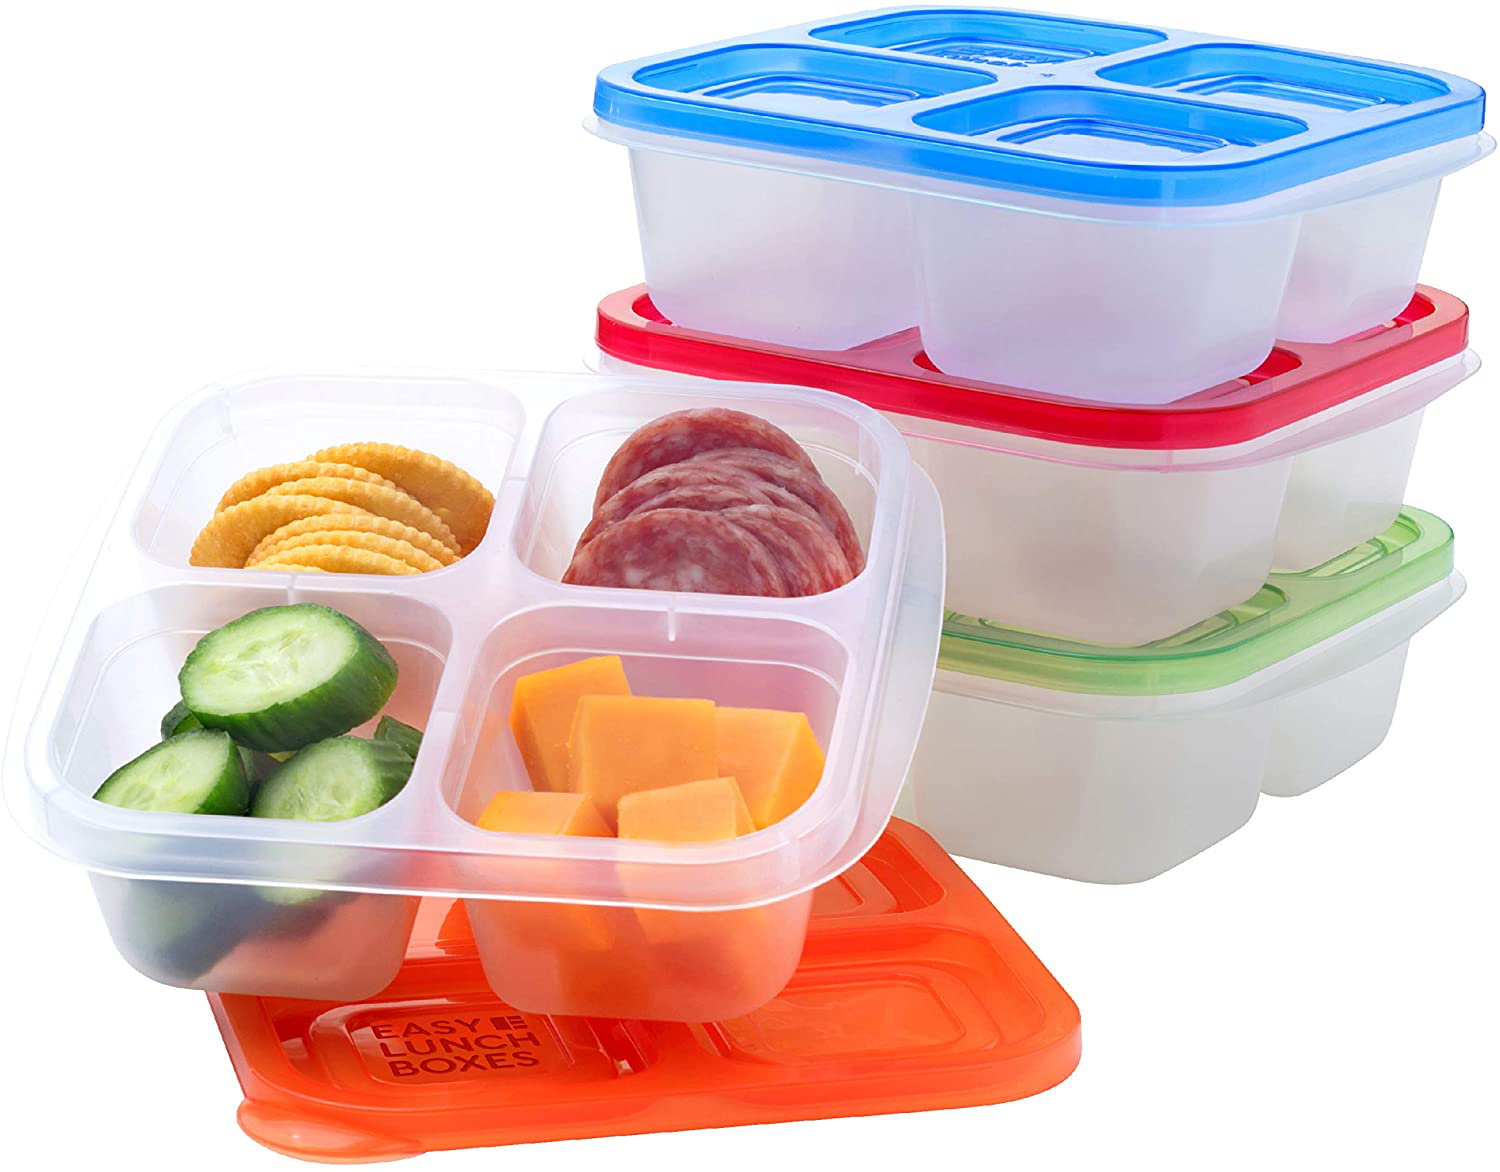 EasyLunchboxes - Bento Lunch Boxes - Reusable 3-Compartment Food Containers  for School, Work, and Travel, Set of 4, (Pastels) 